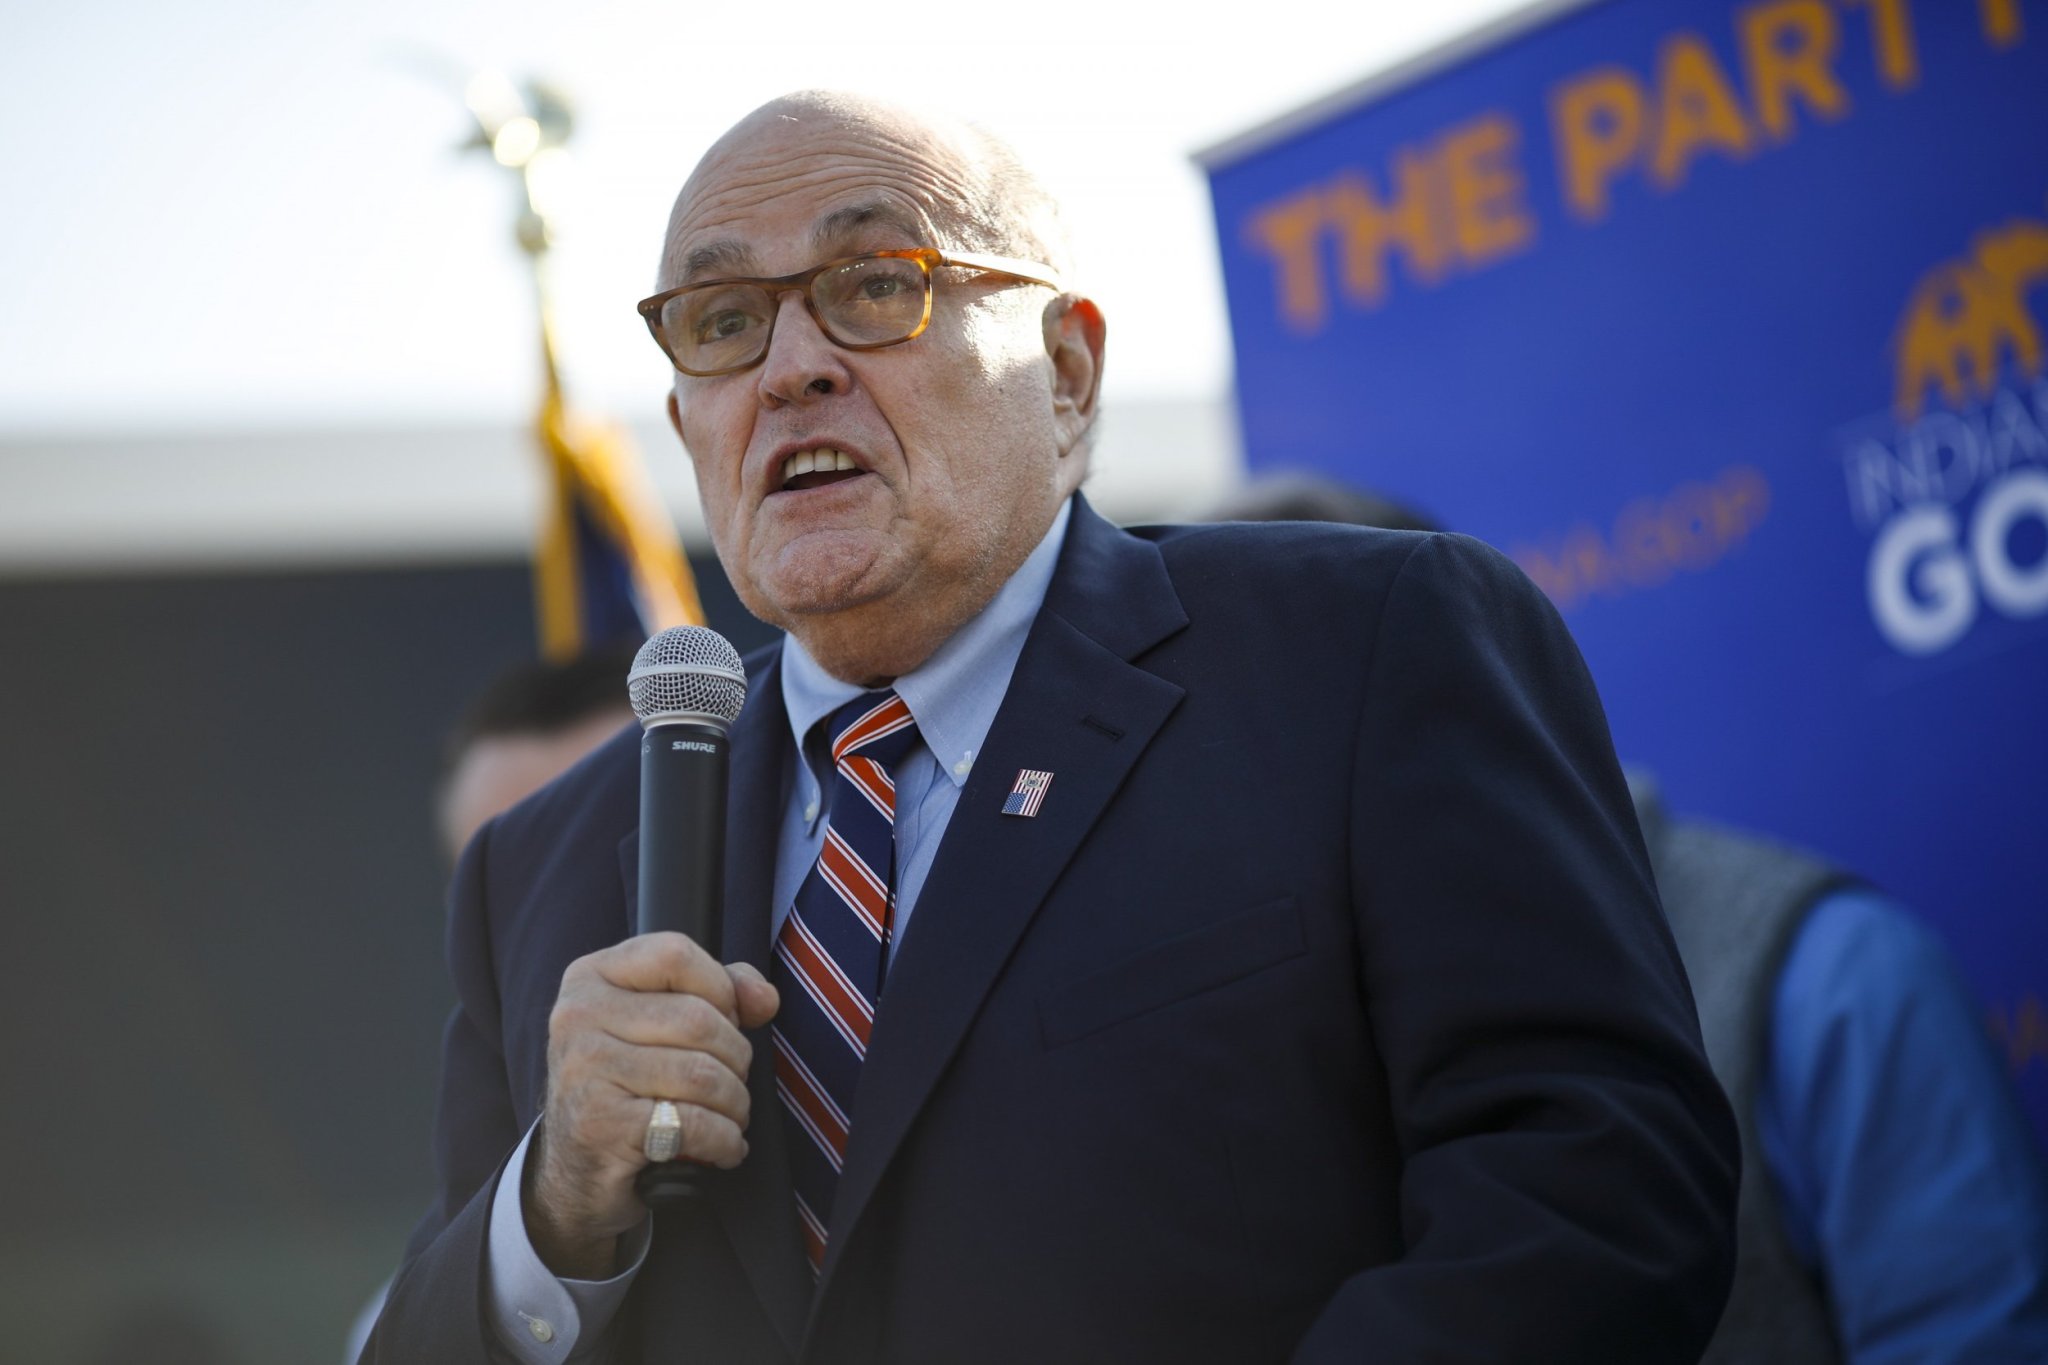 Rudy Giuliani Warns White Supremacists ‘Black Lives Matter Wants to Come and Take Your House From You’